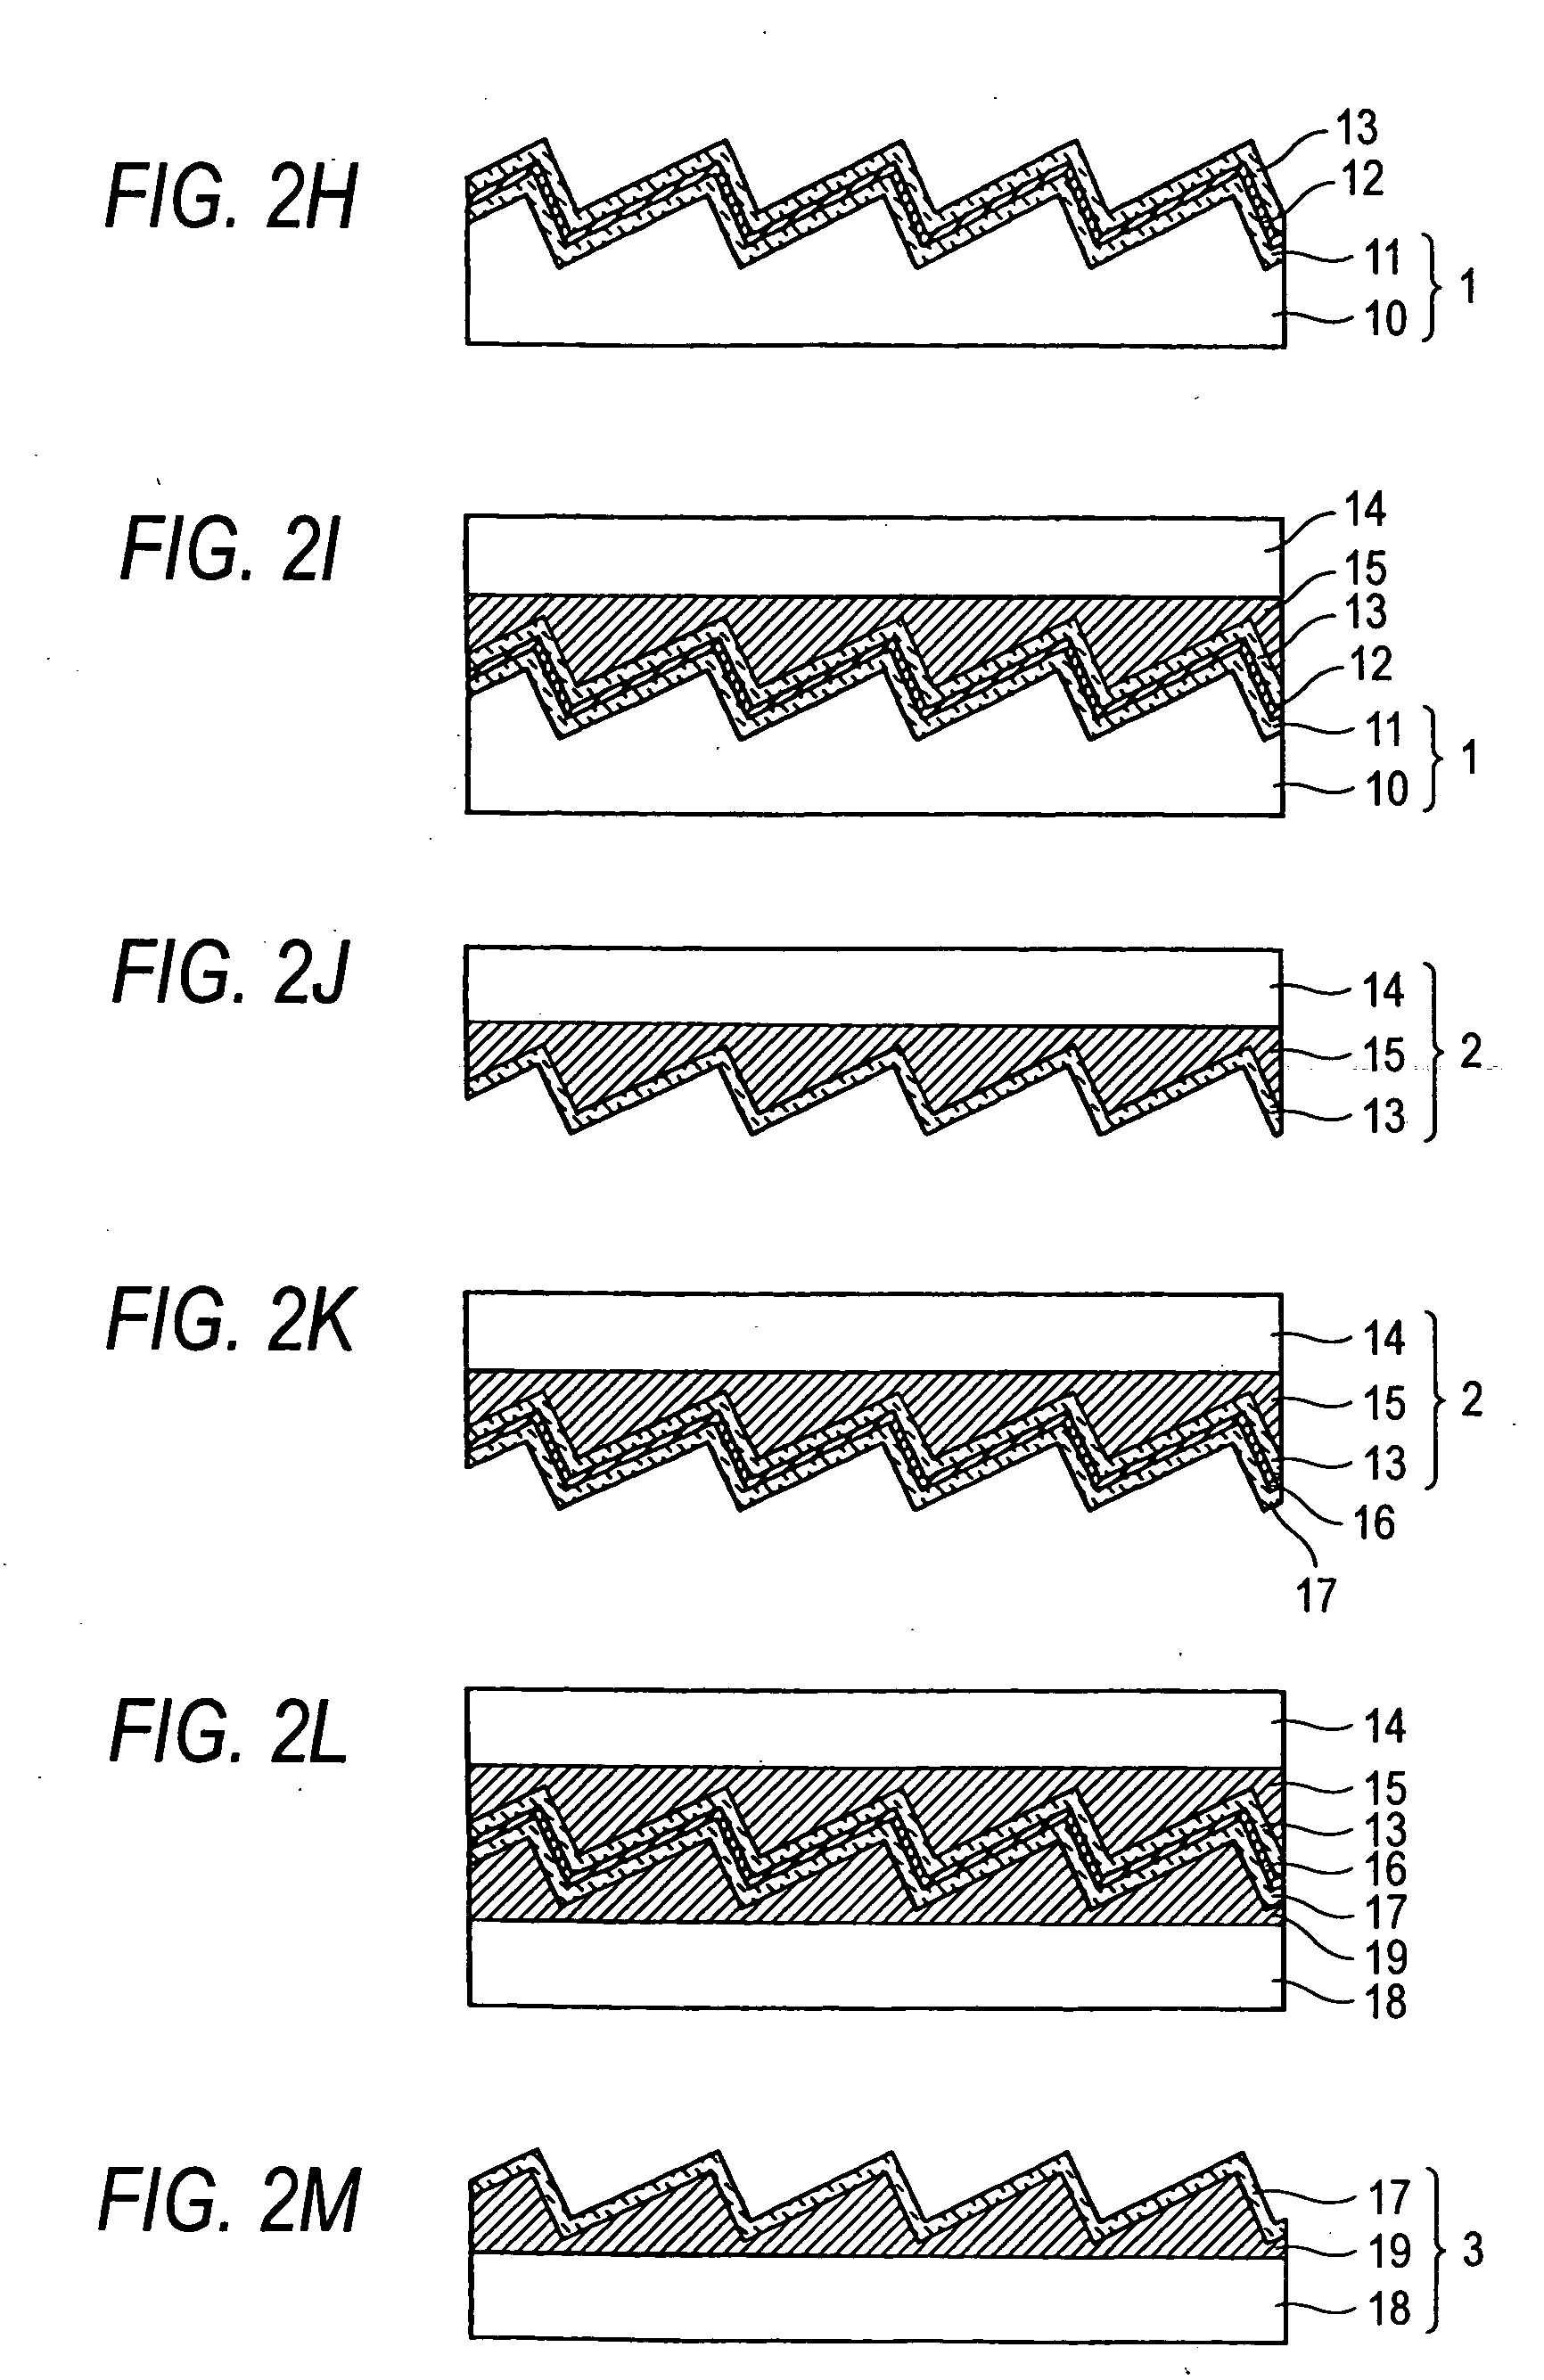 Blazed holographic grating, method for producing the same and replica grating